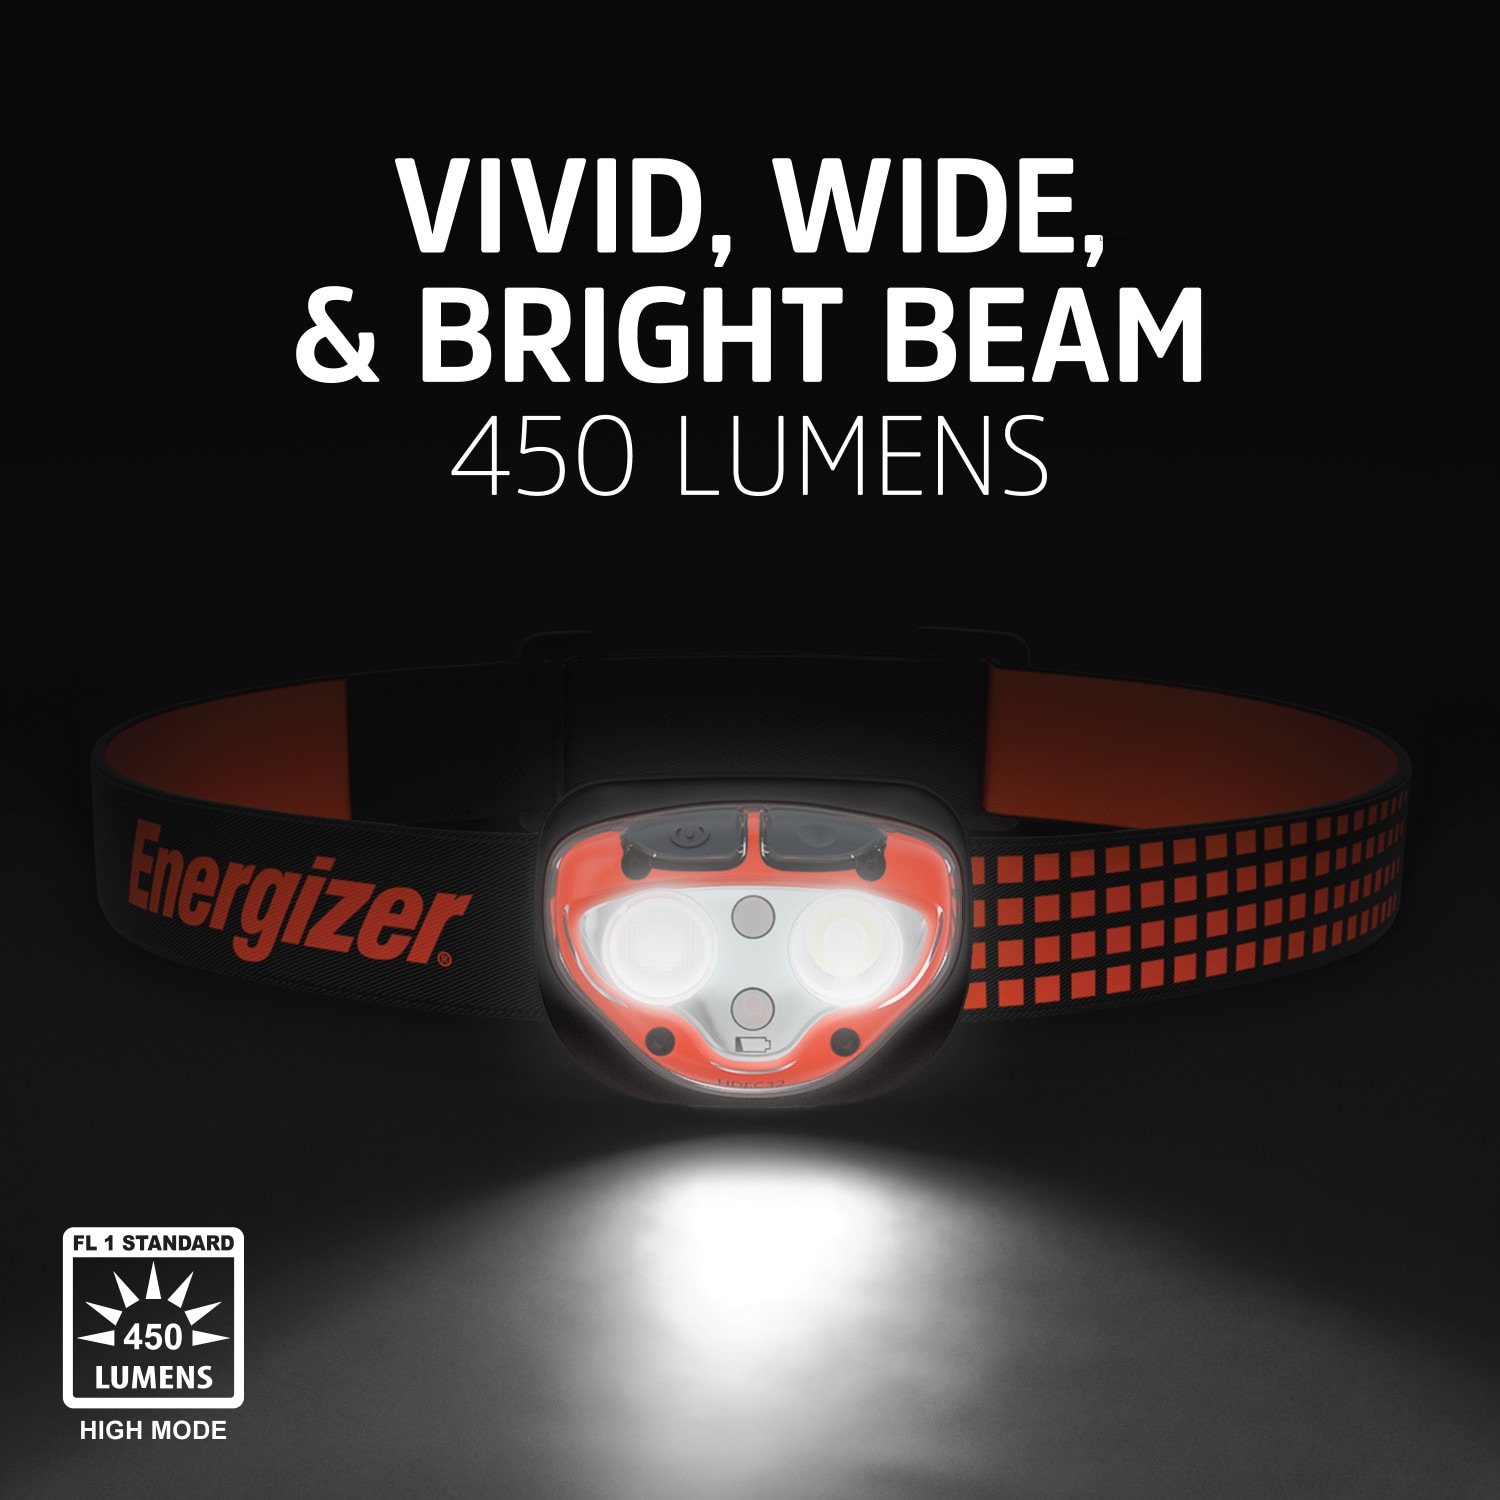 Energizer Vision 450-Lumen LED Headlamp department in Headlamps at Included) (Battery the